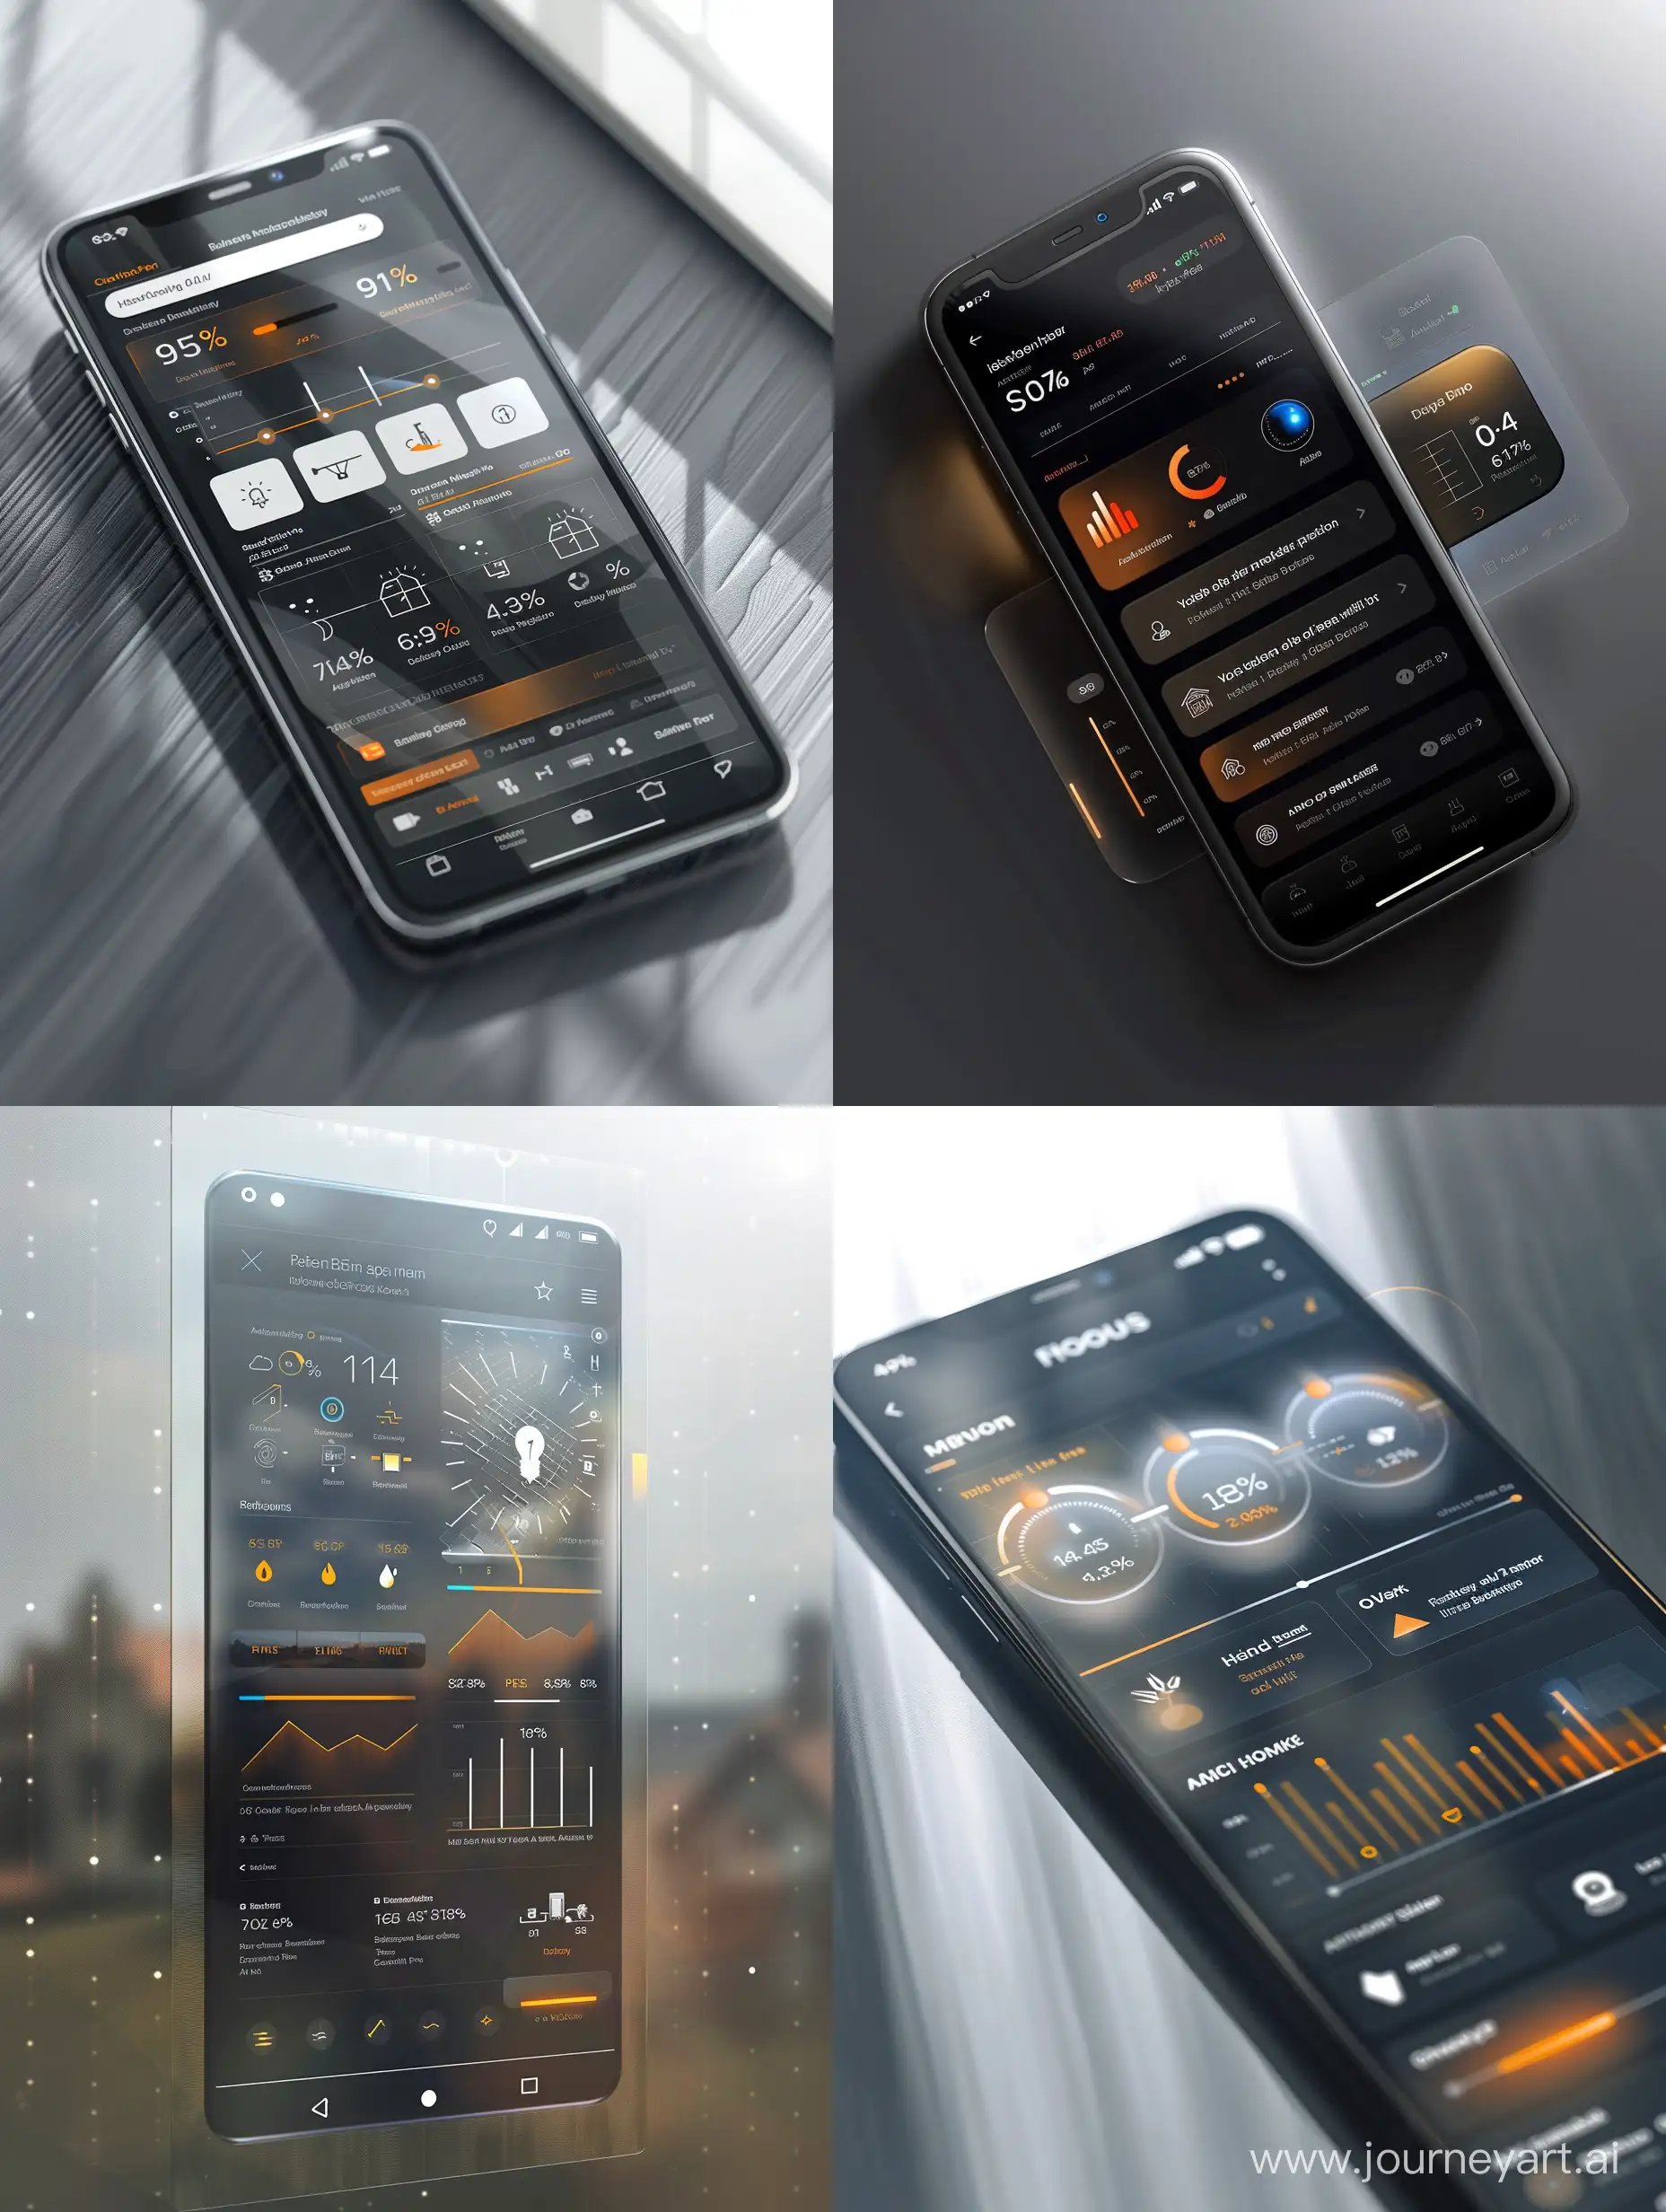 imagine Home Screen (Dashboard) UI
Widgets for real-time energy usage, solar production, and AI recommendations are encased in translucent panels with a subtle blur effect, enhancing legibility while maintaining the aesthetic integrity of the brushed aluminum-inspired background. The bottom navigation bar features high-contrast icons for intuitive access to the app’s main areas.UI design style